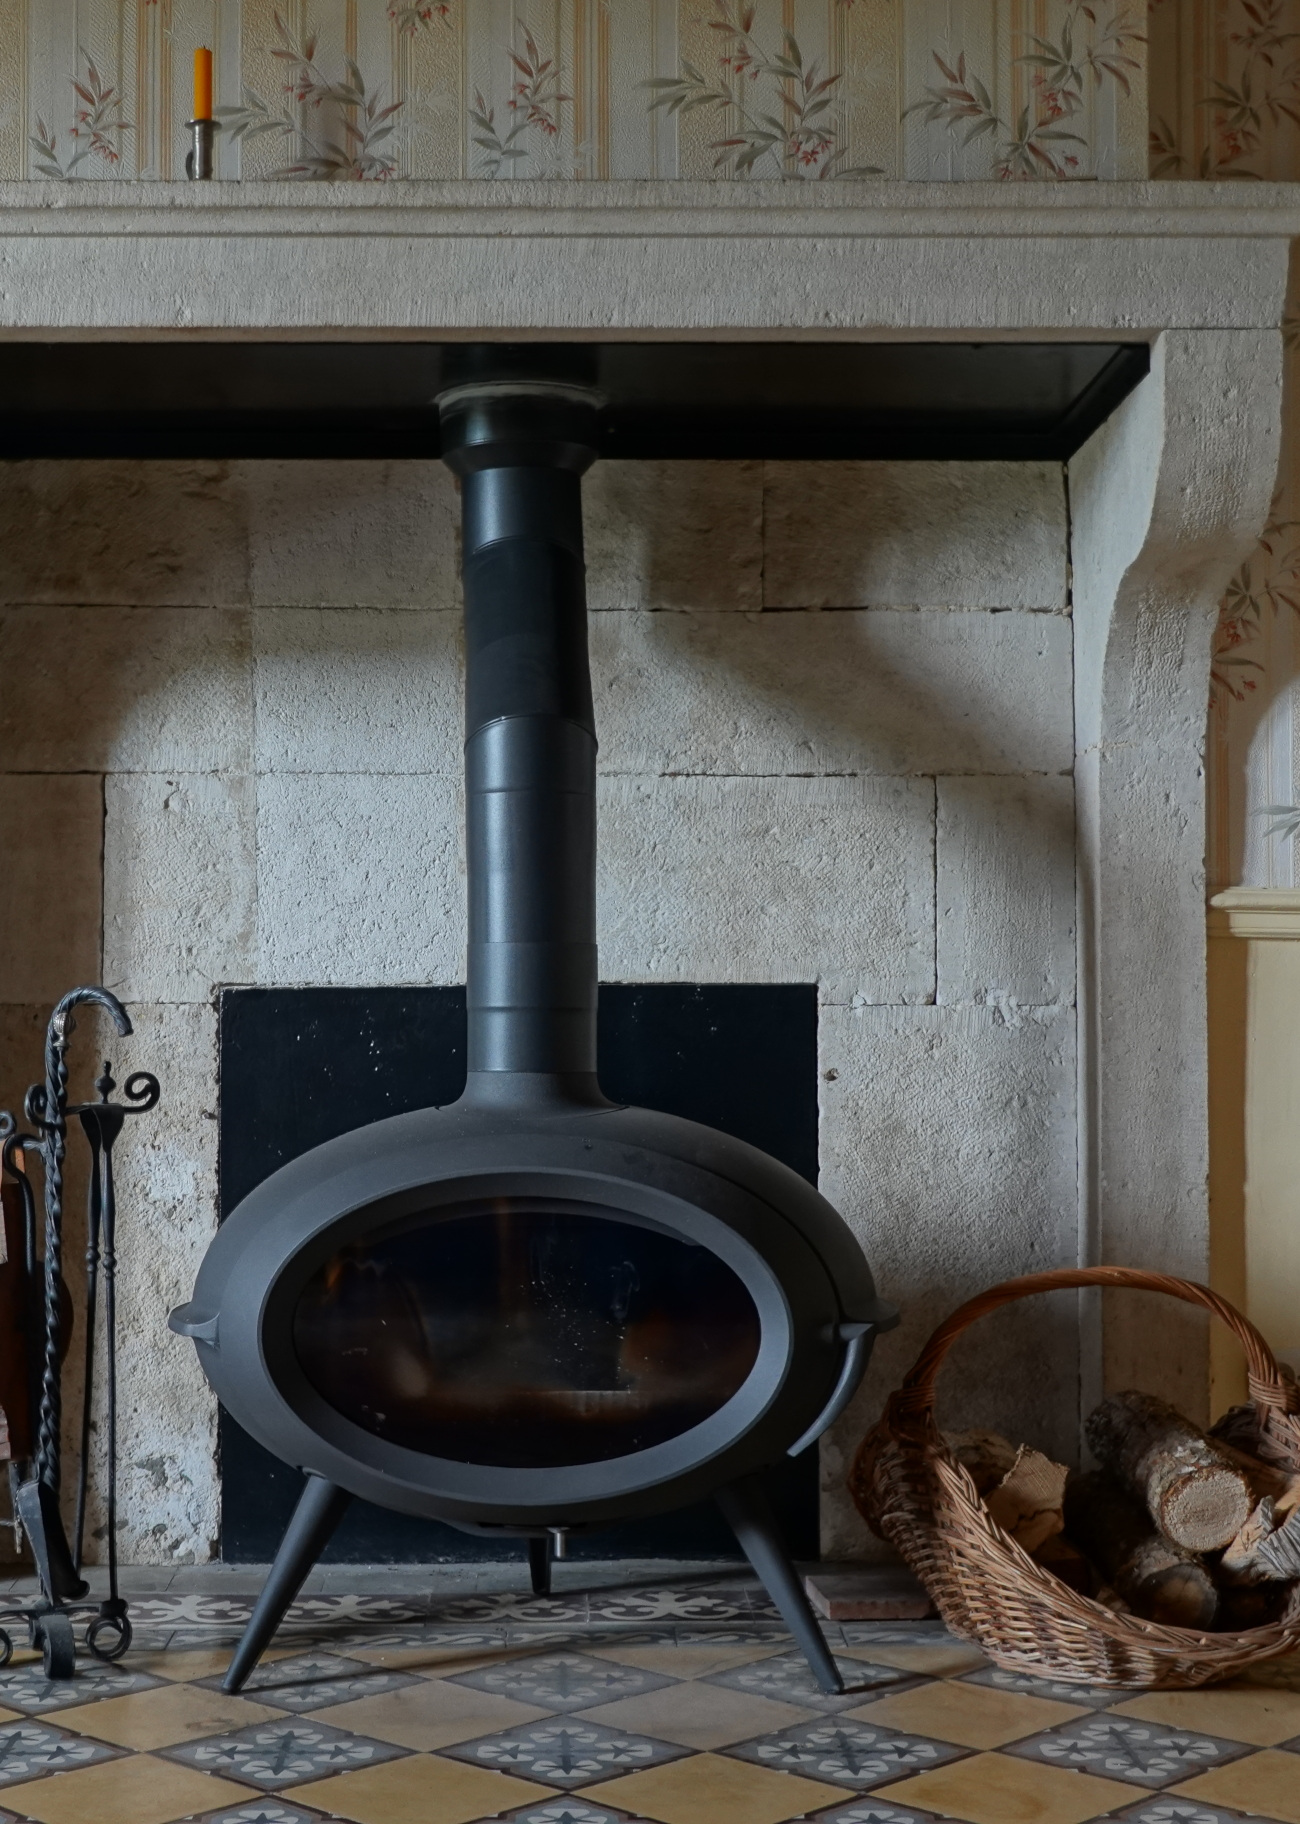 Wood-burning stove in the kitchen